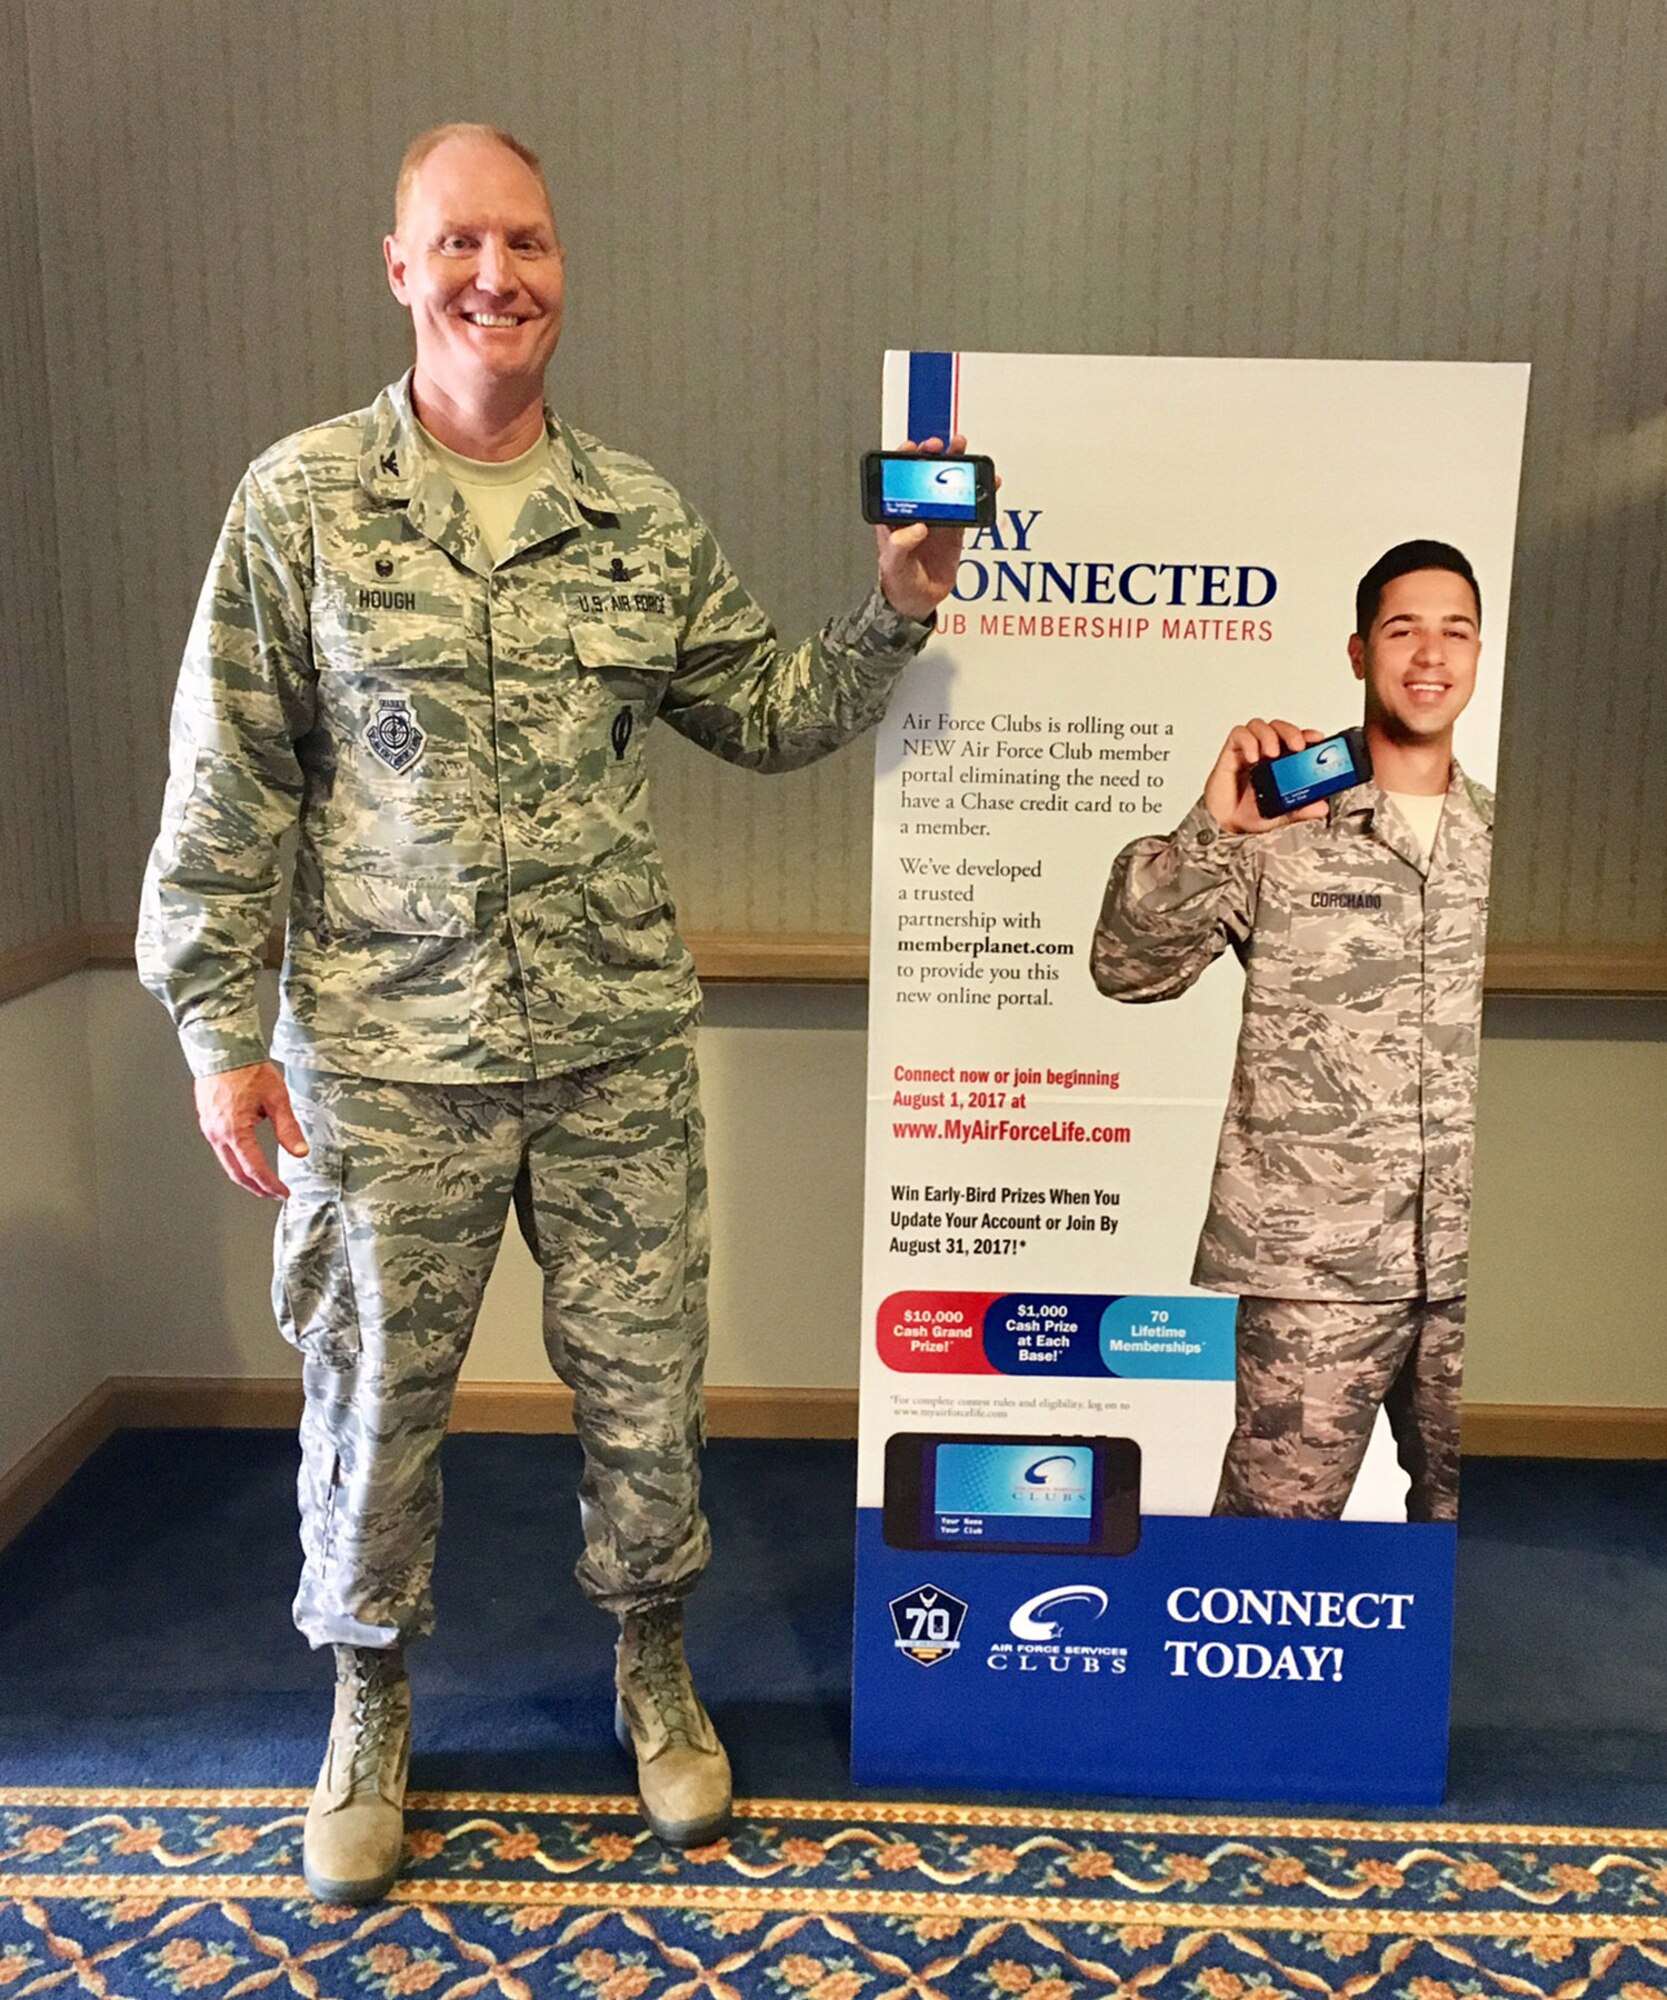 The 30th Space Wing Commander, Col. Michael Hough, was the first Club Member to transition to the new Member Planet Club Card system.